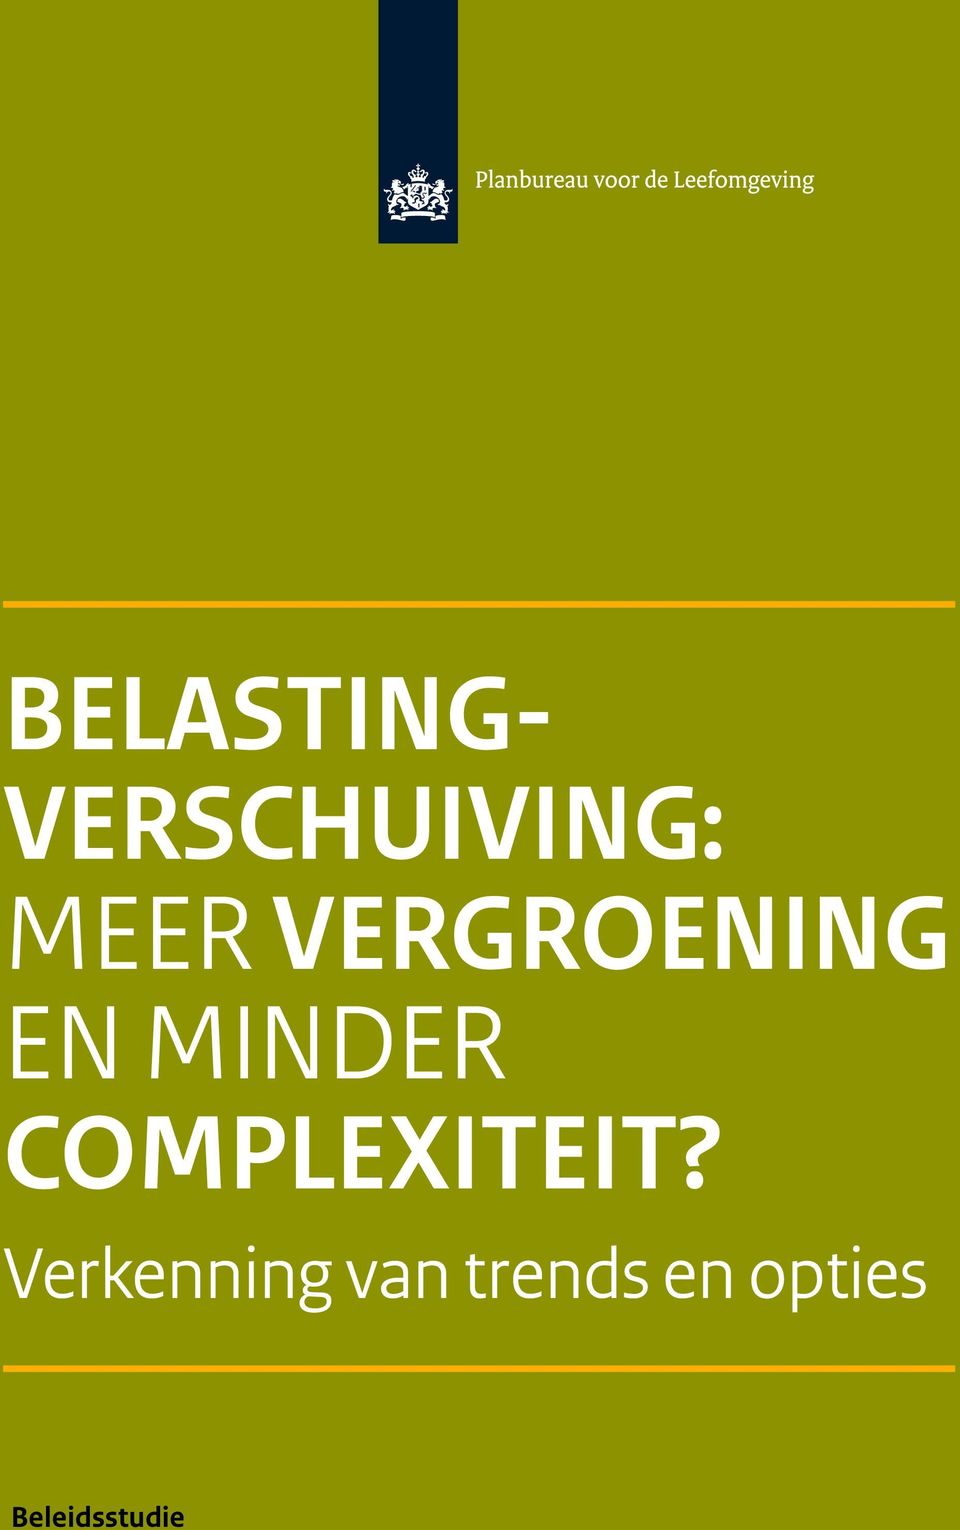 COMPLEXITEIT?